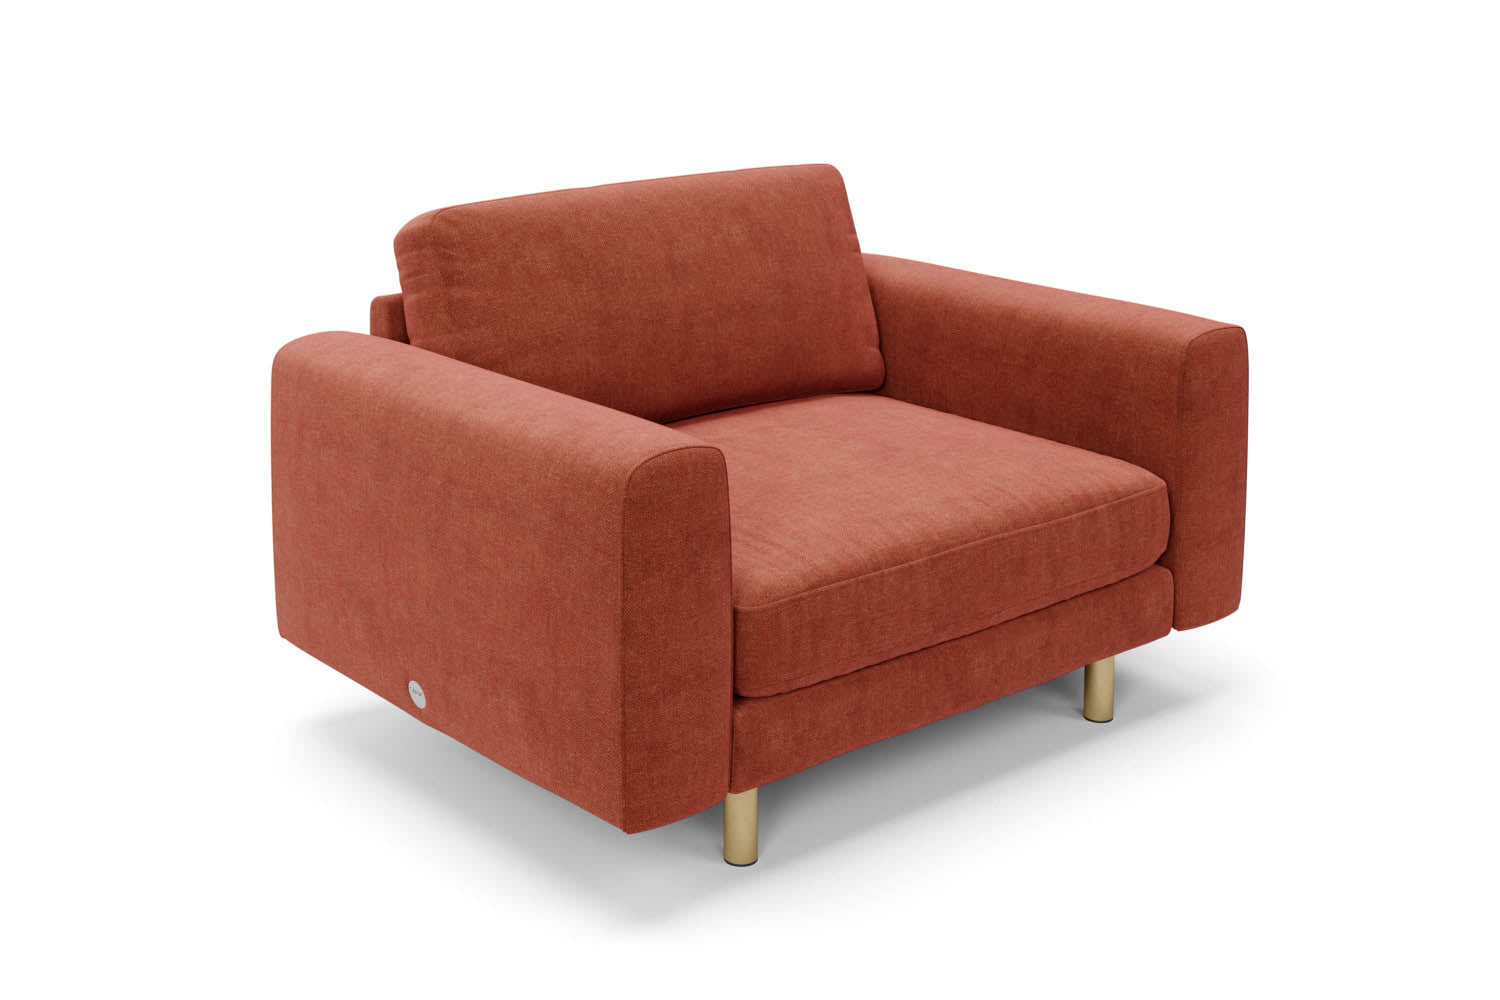 The Big Chill Snuggler in Spice Chenille with metal legs